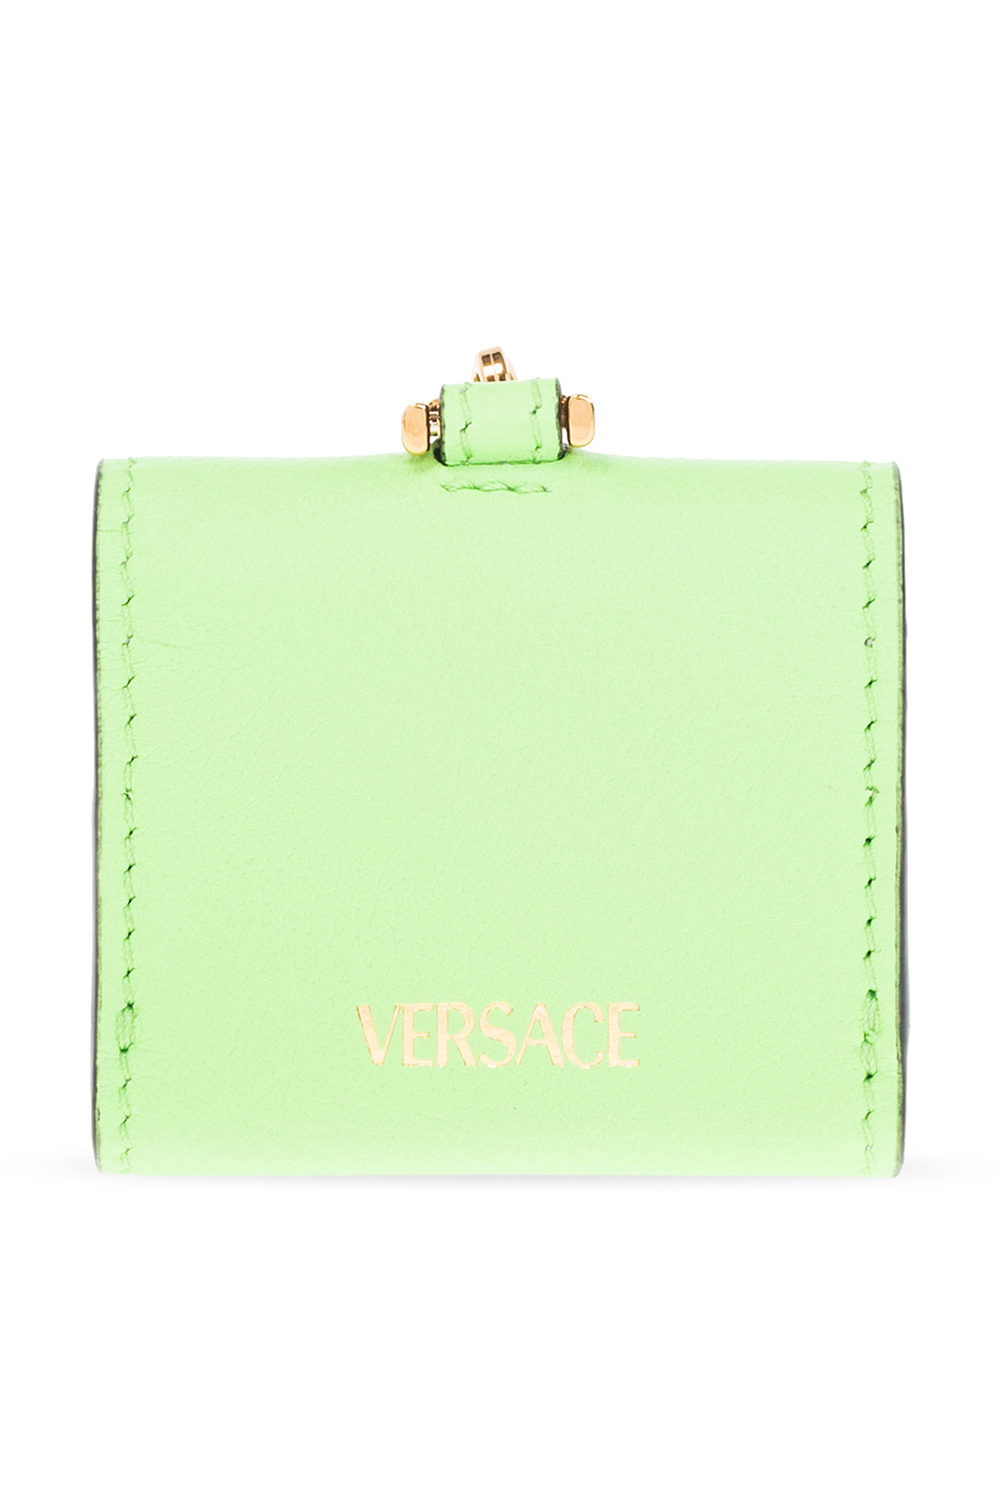 Versace AirPods case